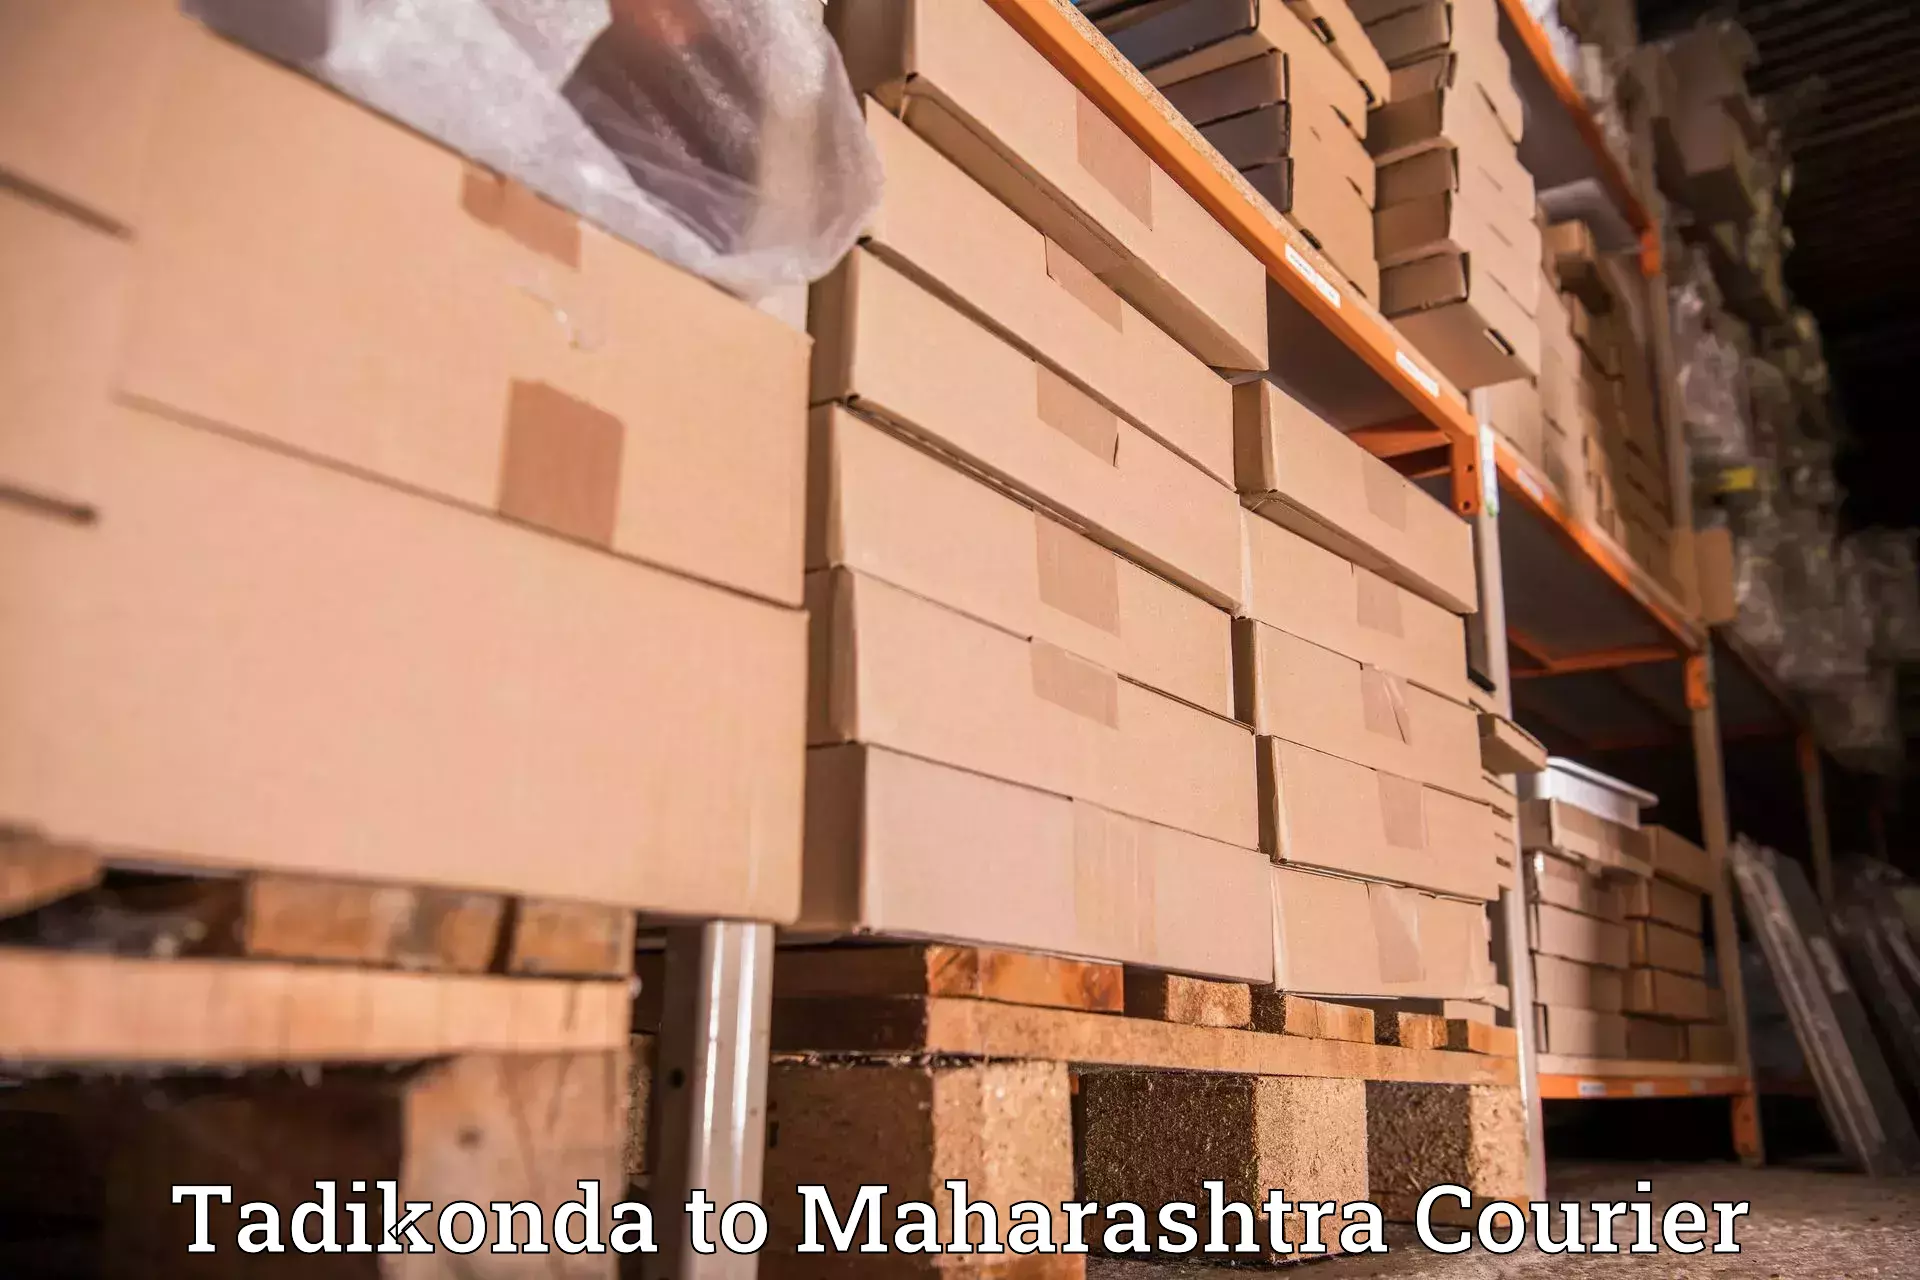 Flexible delivery scheduling Tadikonda to Solapur